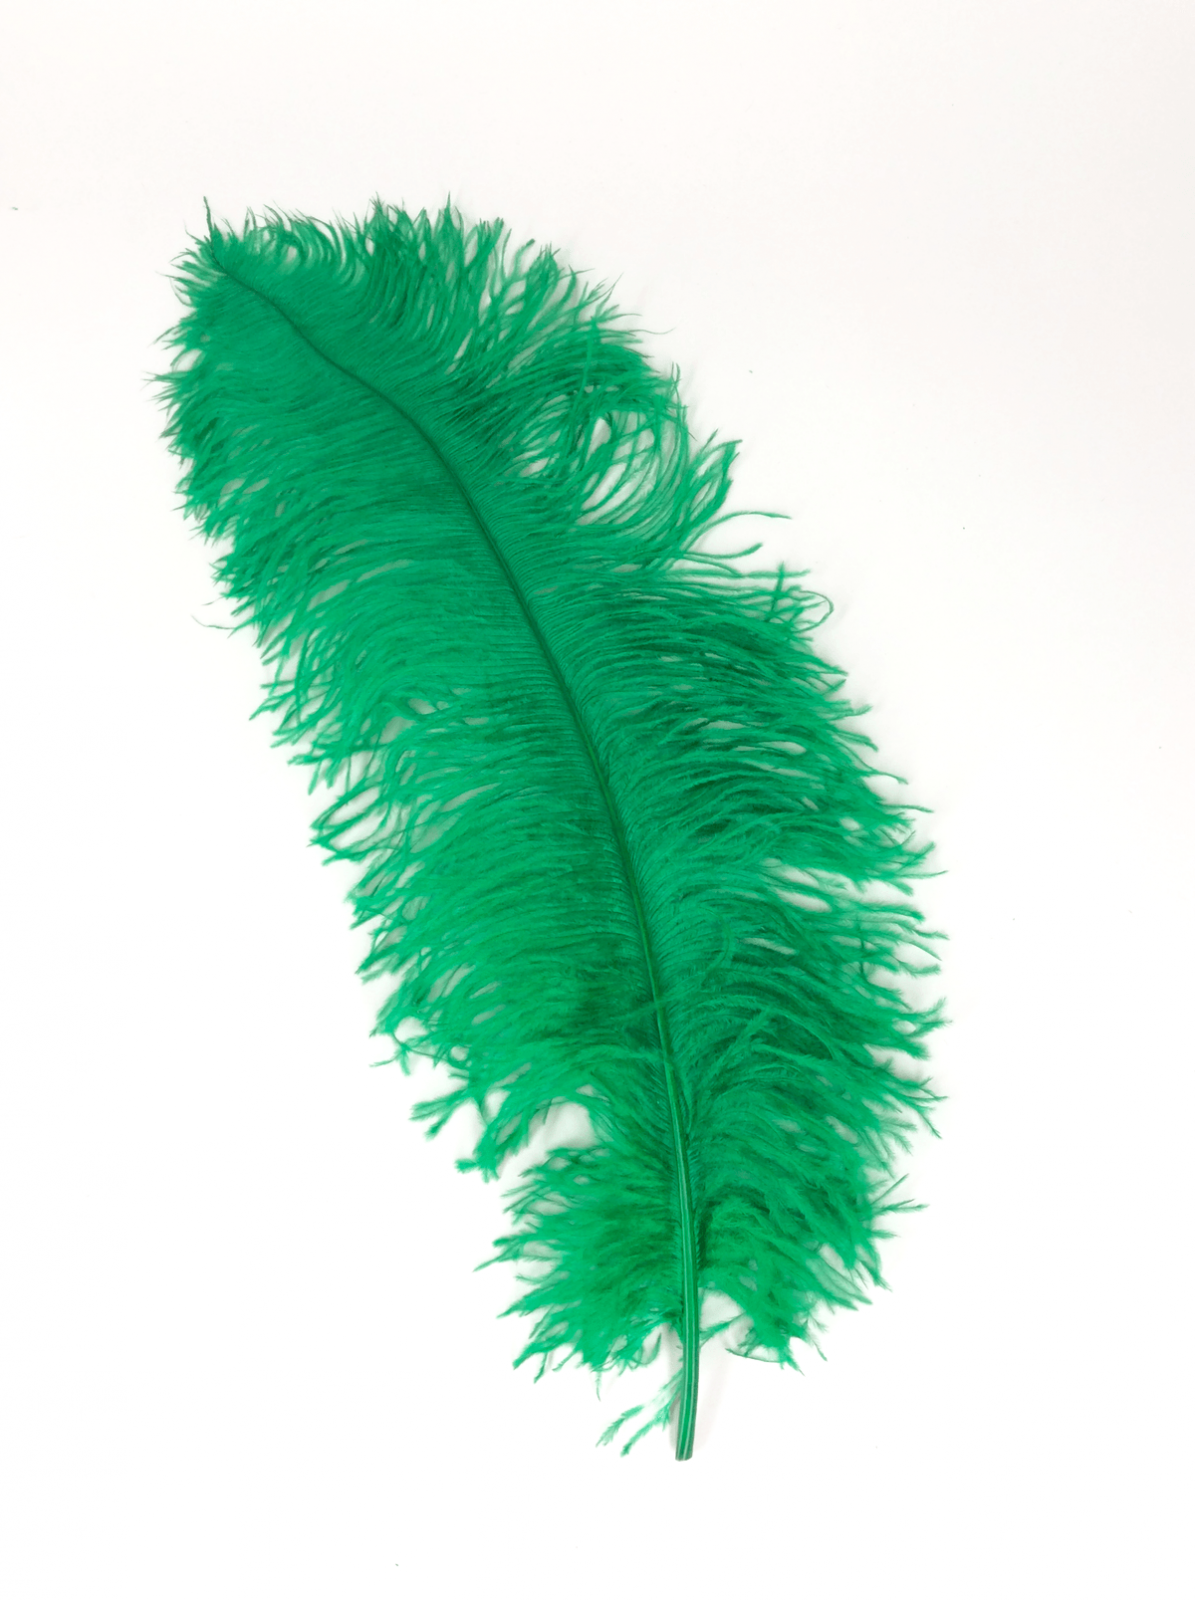 Ostrich Feather Hdpng.com  - Ostrich Feather, Transparent background PNG HD thumbnail